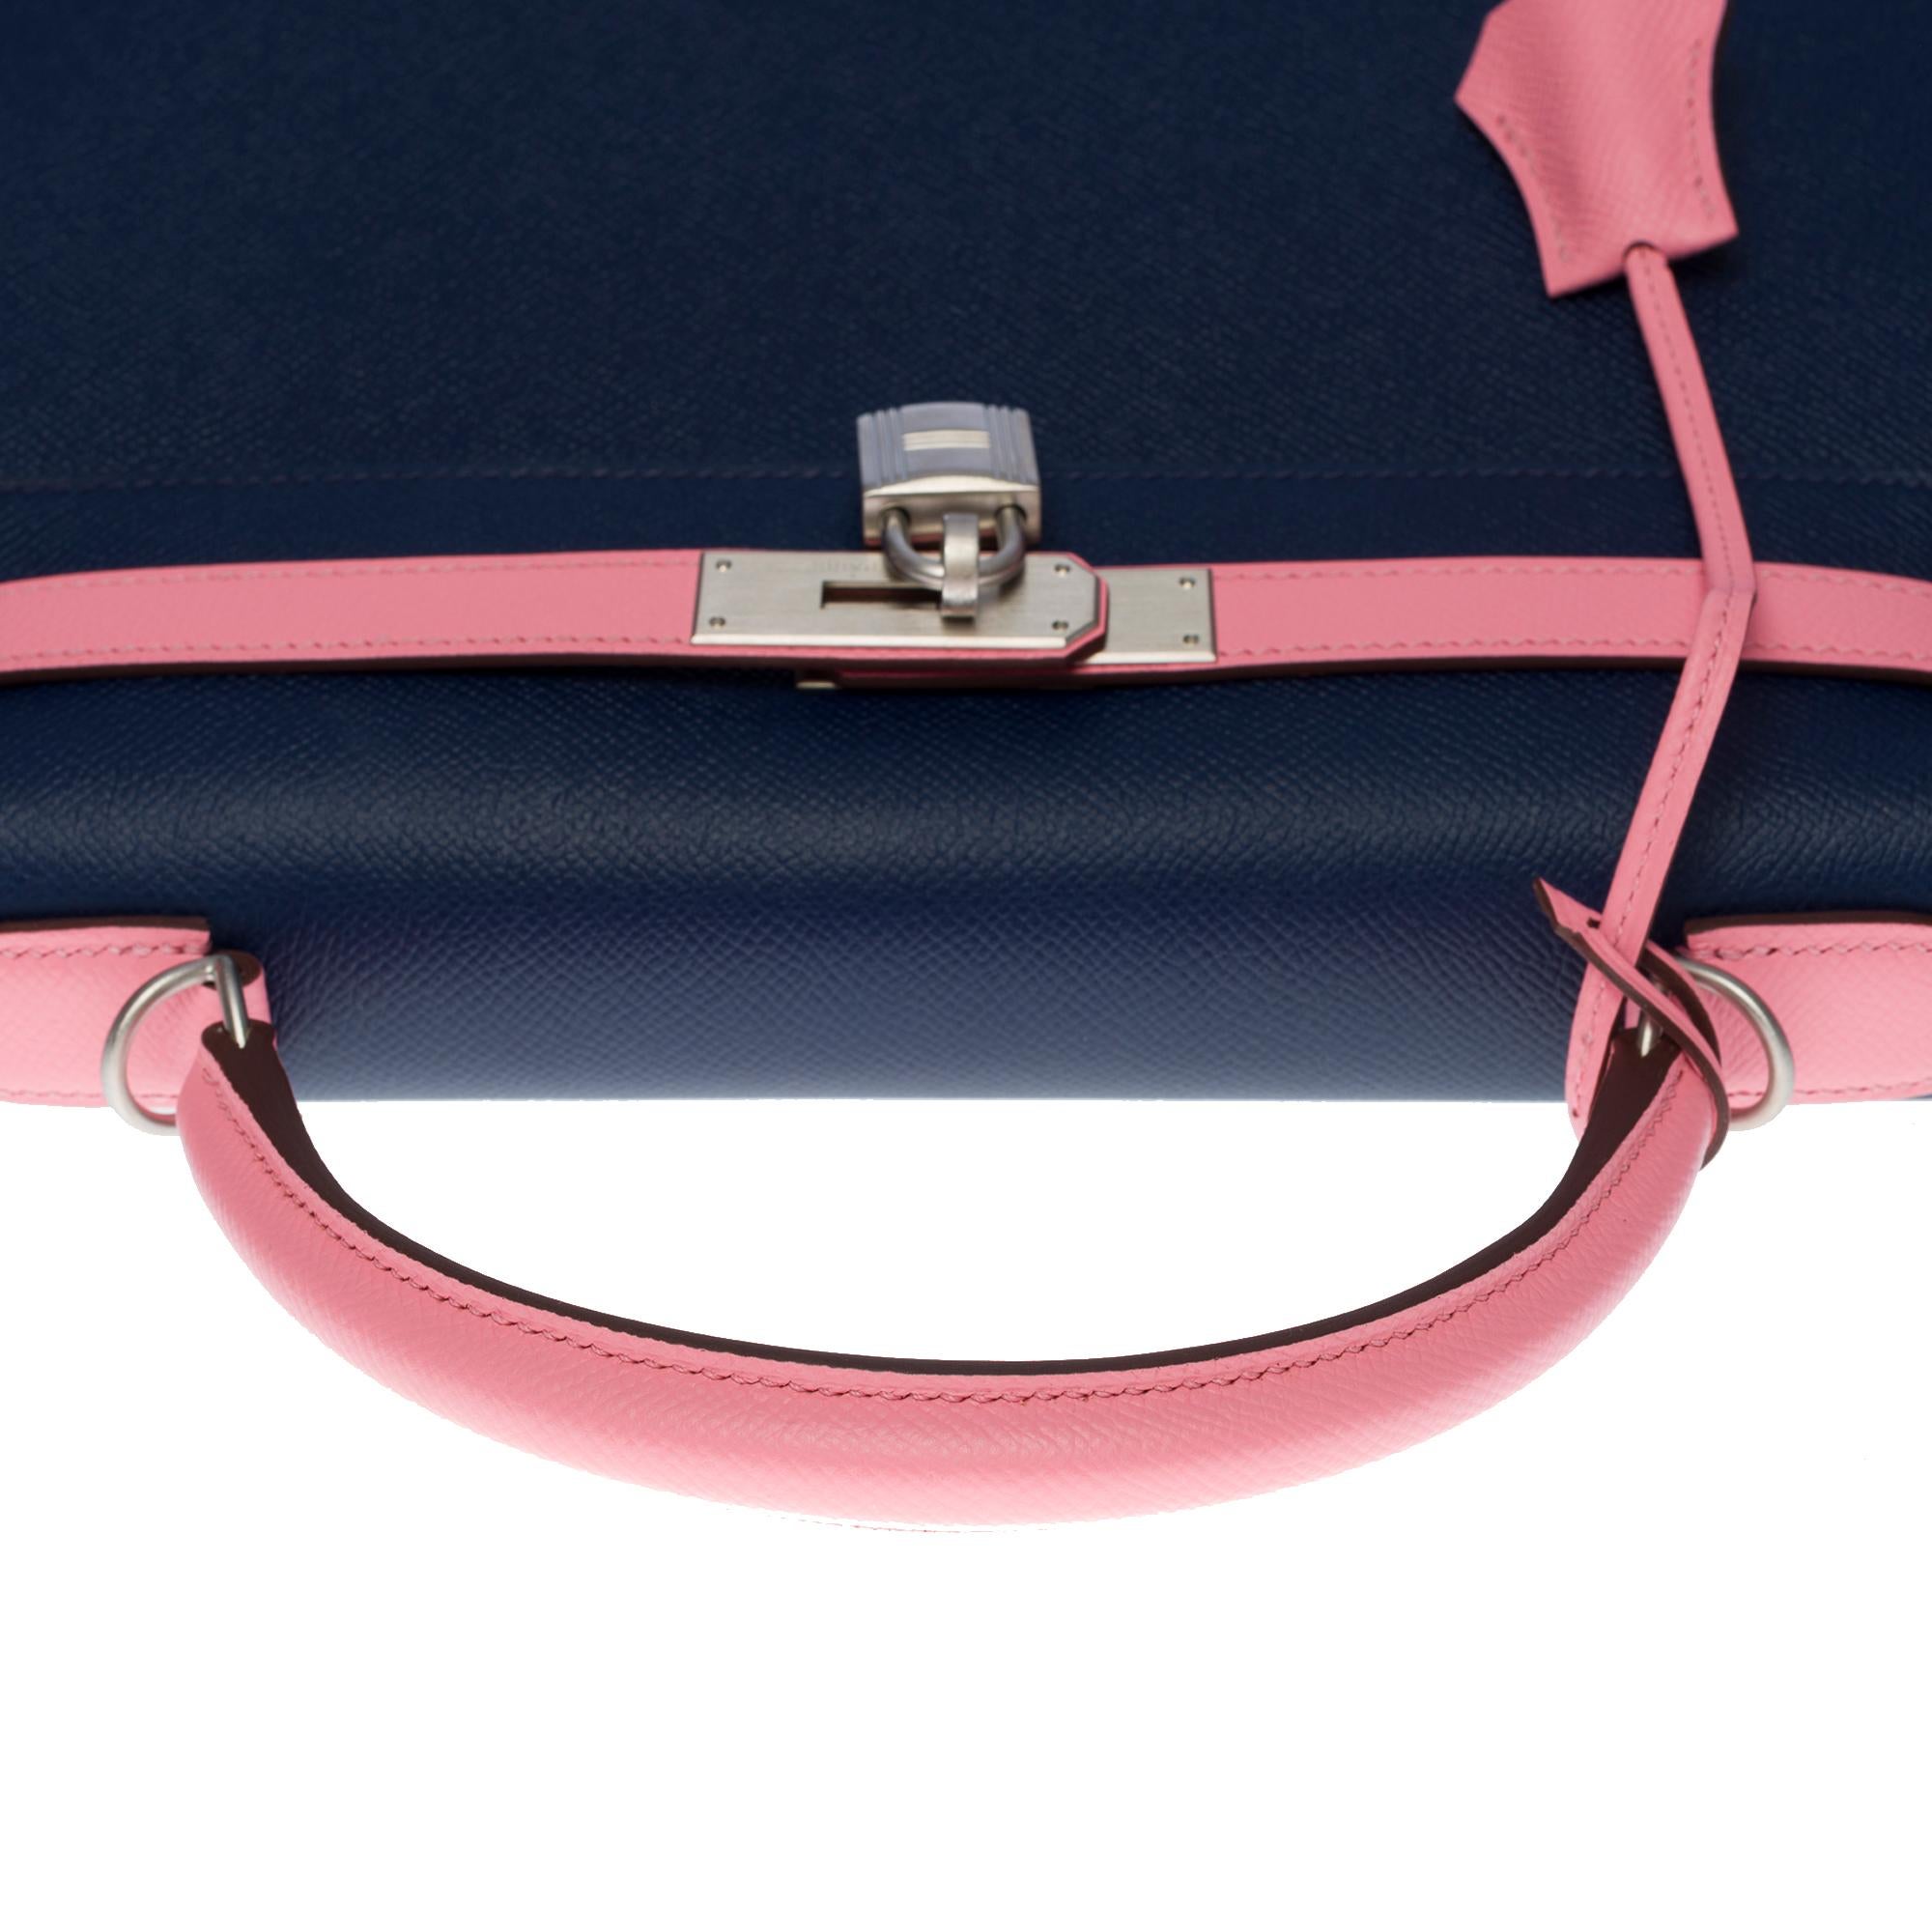 Hermès Kelly 32 sellier Special Order (HSS) in Pink and Blue Epsom leather, BSHW 5